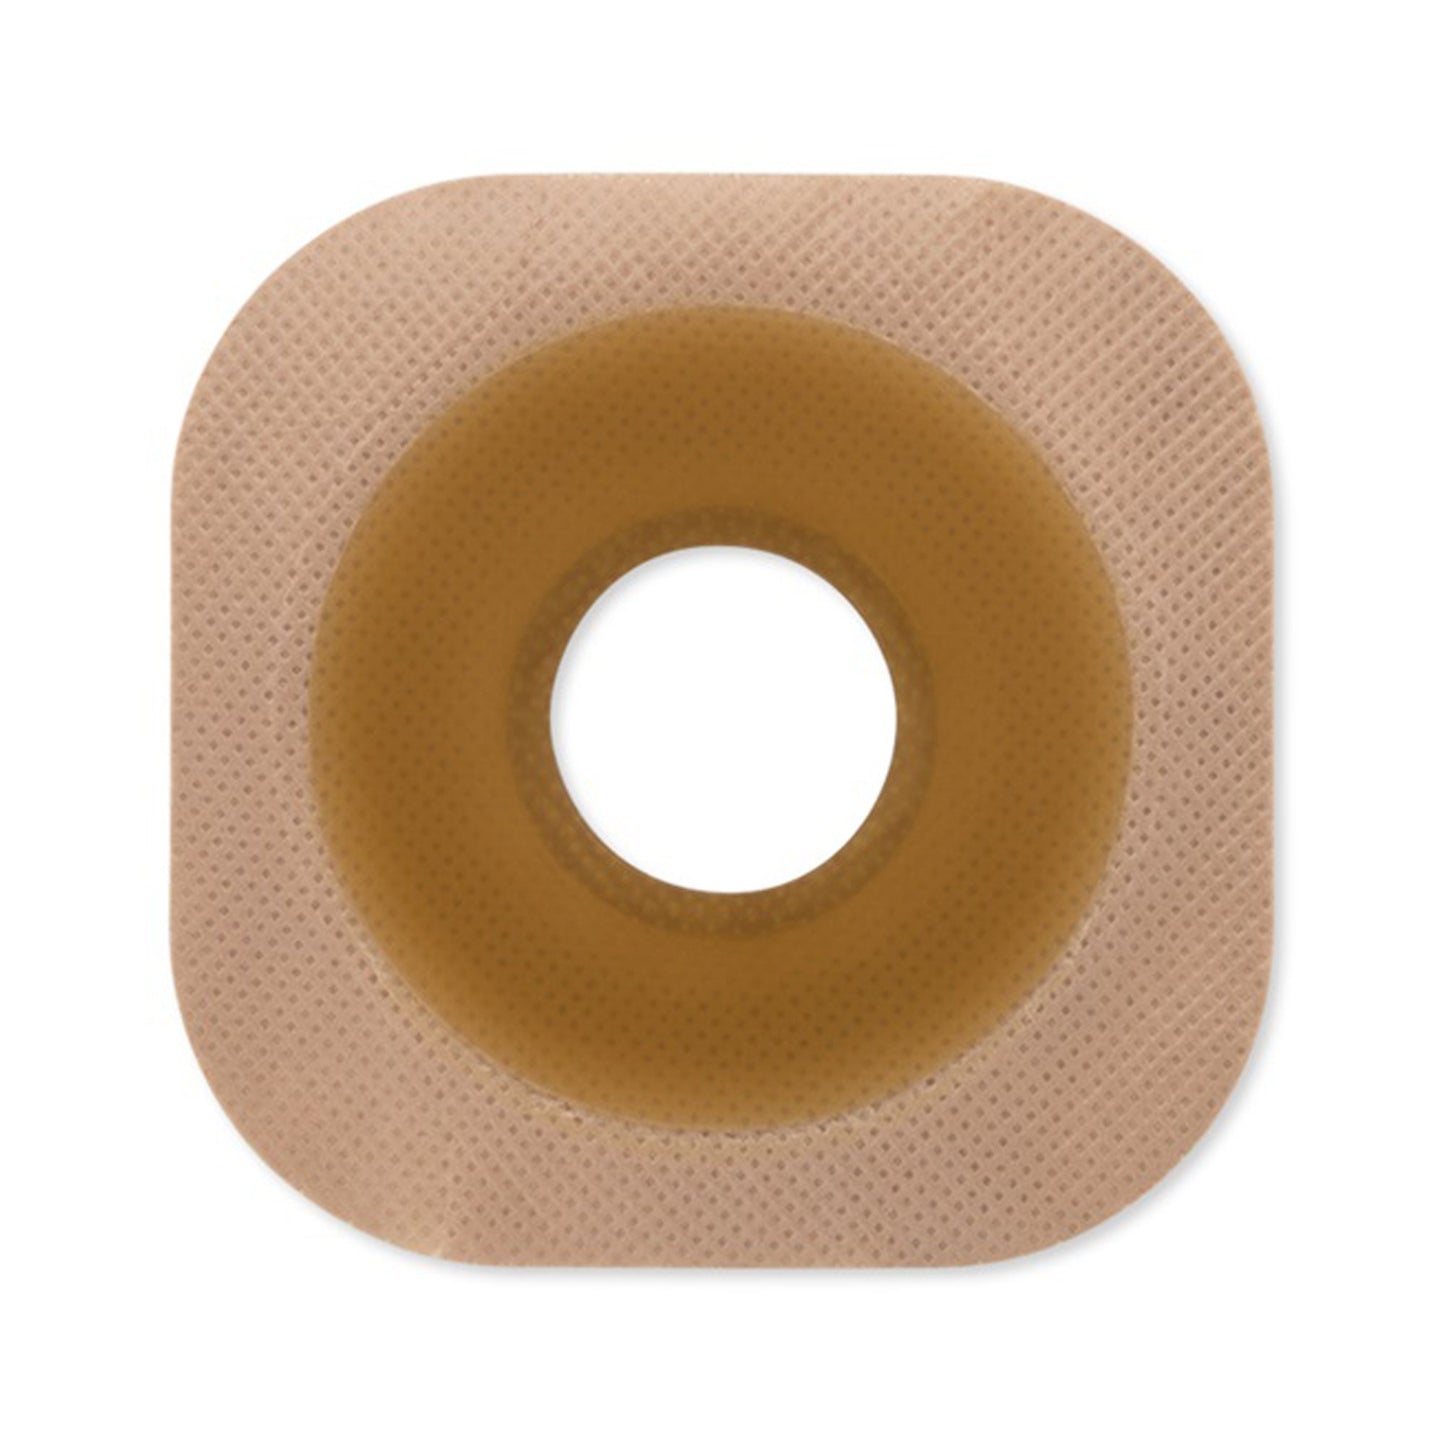 FlexTend™ Colostomy Barrier With Up to 1.25 Inch Stoma Opening, 5 ct